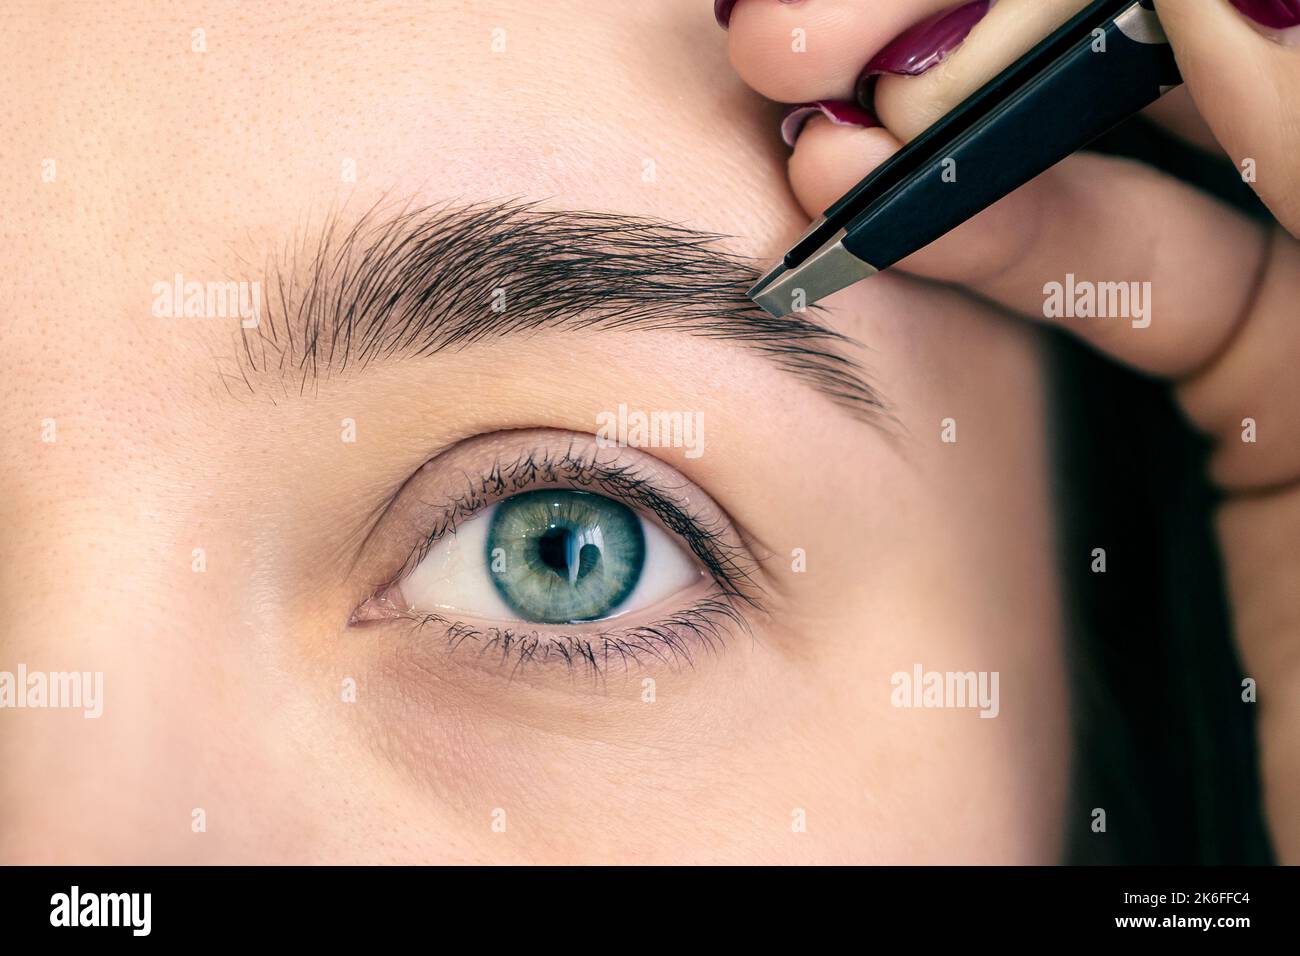 Make-up. Eyebrow Makeup. Eyes. procedure for plucking eyebrows in a beauty salon close-up. Stock Photo